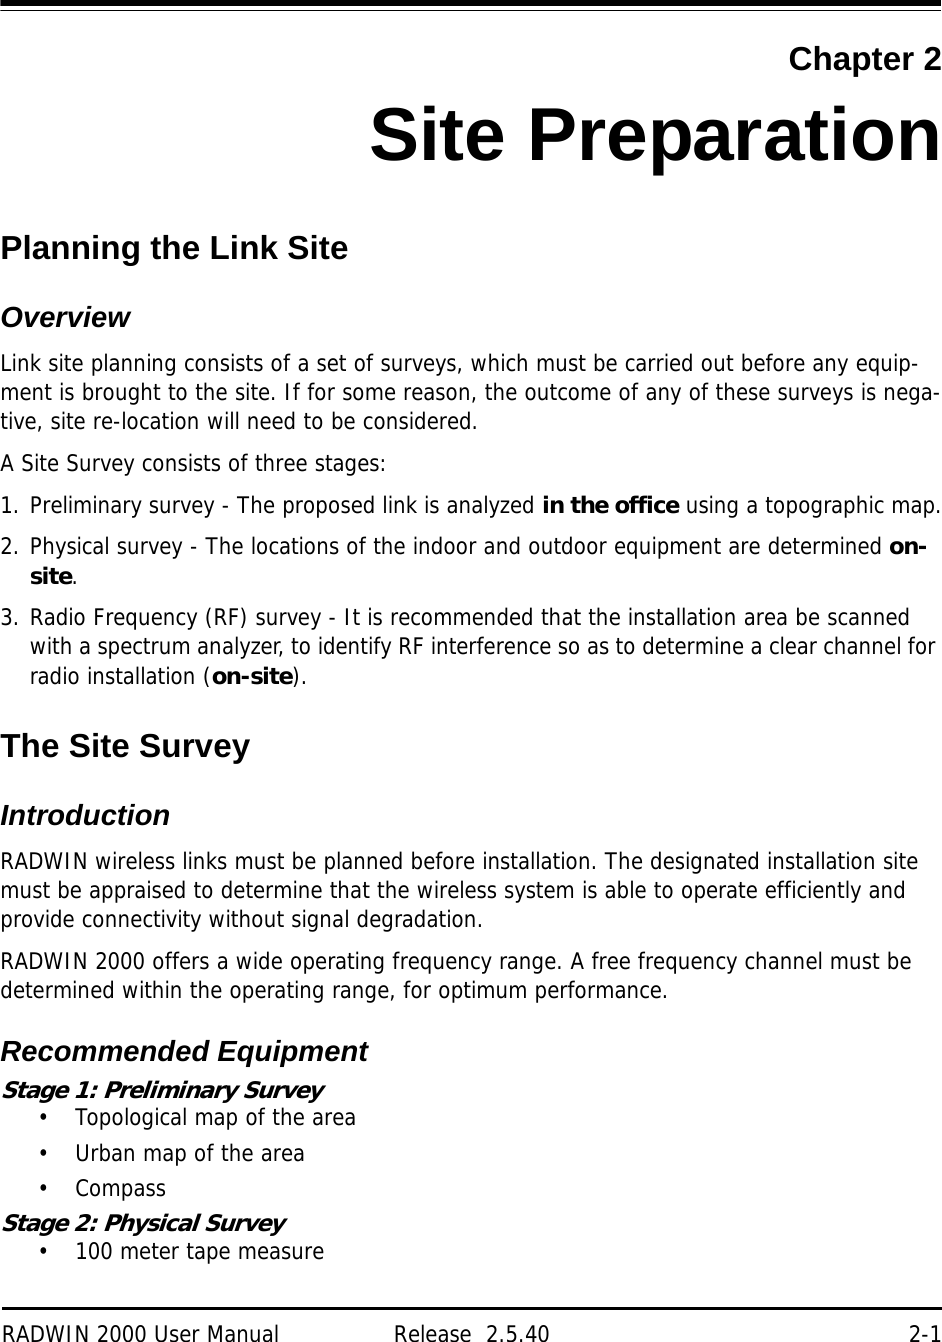 RADWIN 2000 User Manual Release  2.5.40 2-1Chapter 2Site PreparationPlanning the Link SiteOverviewLink site planning consists of a set of surveys, which must be carried out before any equip-ment is brought to the site. If for some reason, the outcome of any of these surveys is nega-tive, site re-location will need to be considered.A Site Survey consists of three stages:1. Preliminary survey - The proposed link is analyzed in the office using a topographic map.2. Physical survey - The locations of the indoor and outdoor equipment are determined on-site.3. Radio Frequency (RF) survey - It is recommended that the installation area be scanned with a spectrum analyzer, to identify RF interference so as to determine a clear channel for radio installation (on-site).The Site SurveyIntroductionRADWIN wireless links must be planned before installation. The designated installation site must be appraised to determine that the wireless system is able to operate efficiently and provide connectivity without signal degradation.RADWIN 2000 offers a wide operating frequency range. A free frequency channel must be determined within the operating range, for optimum performance.Recommended EquipmentStage 1: Preliminary Survey• Topological map of the area• Urban map of the area•CompassStage 2: Physical Survey• 100 meter tape measure